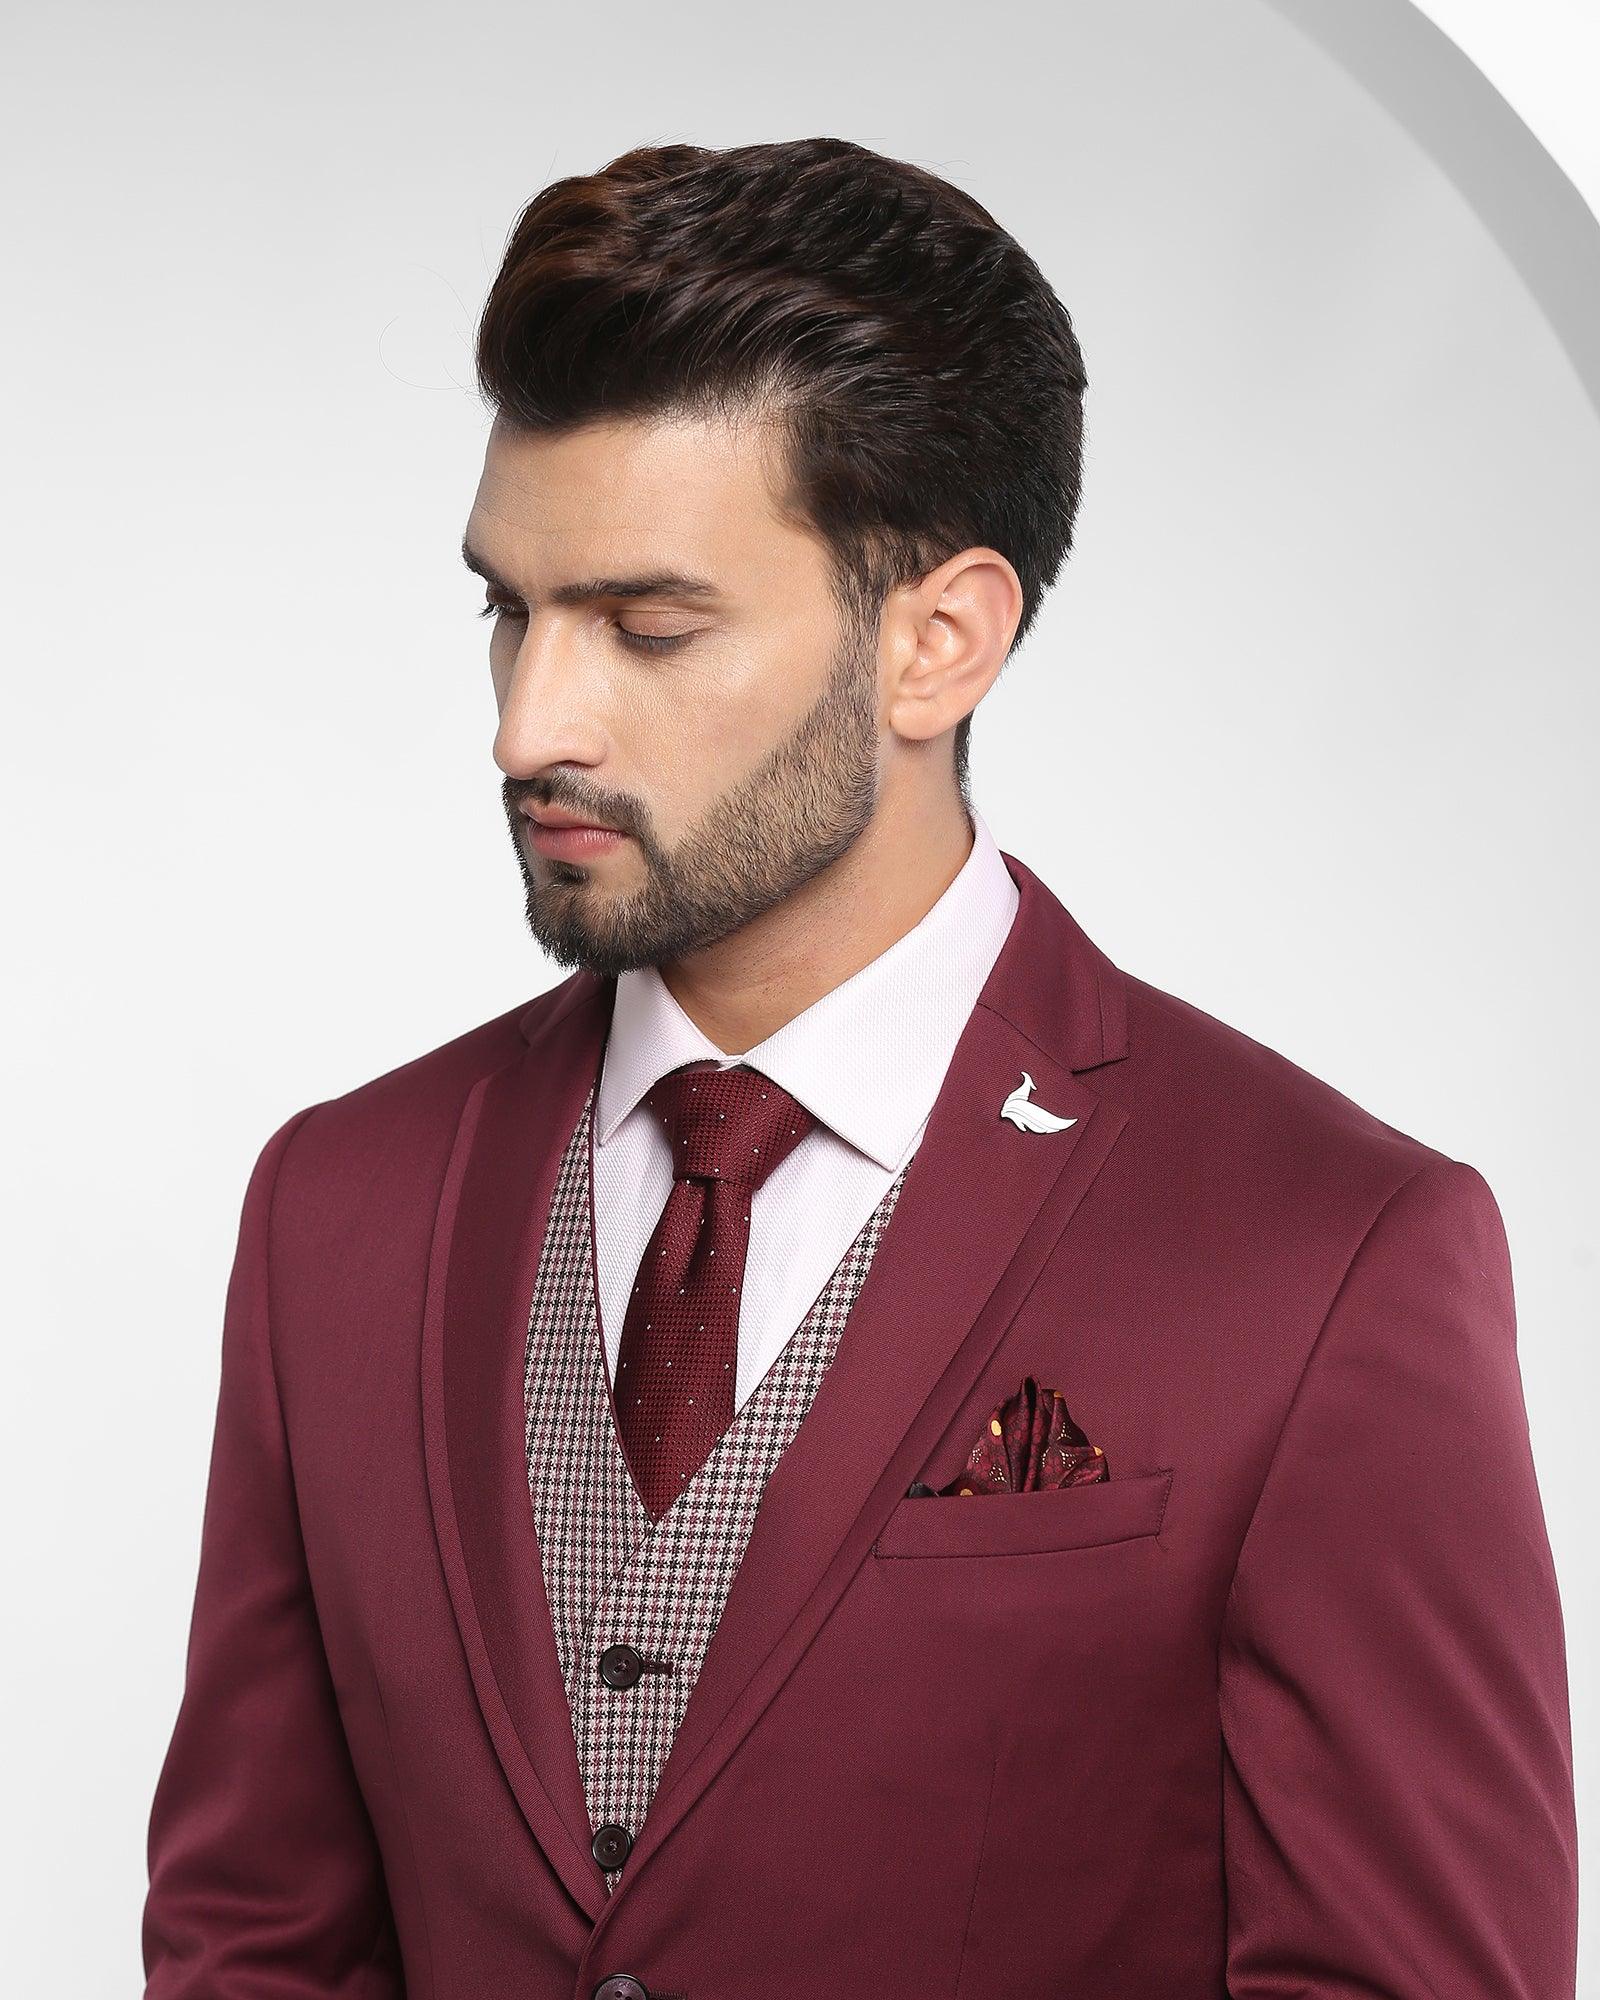 Solid Formal 6X Suits In Maroon Throne CPNM1431R12A22FL image3